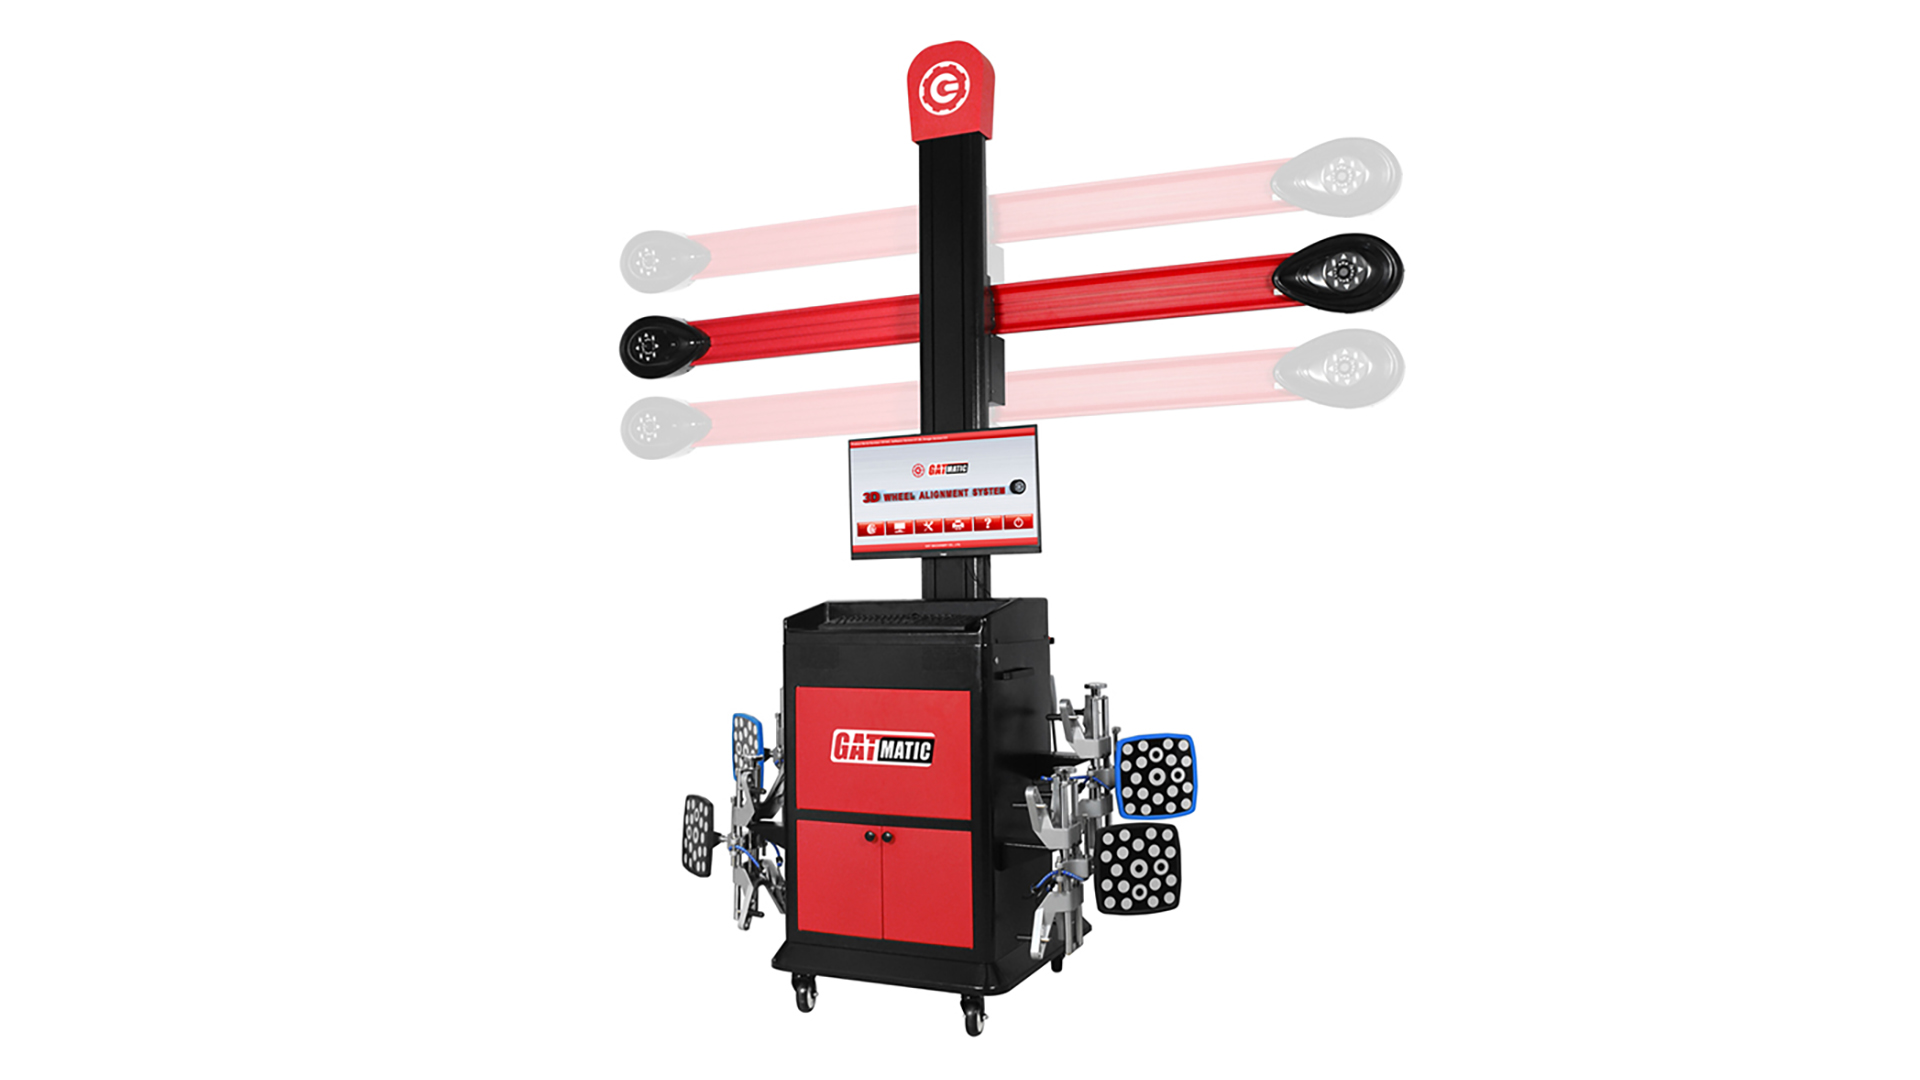 Gat-matic Auto Tracking 3D Movable Wheel Alignment Machine How to use